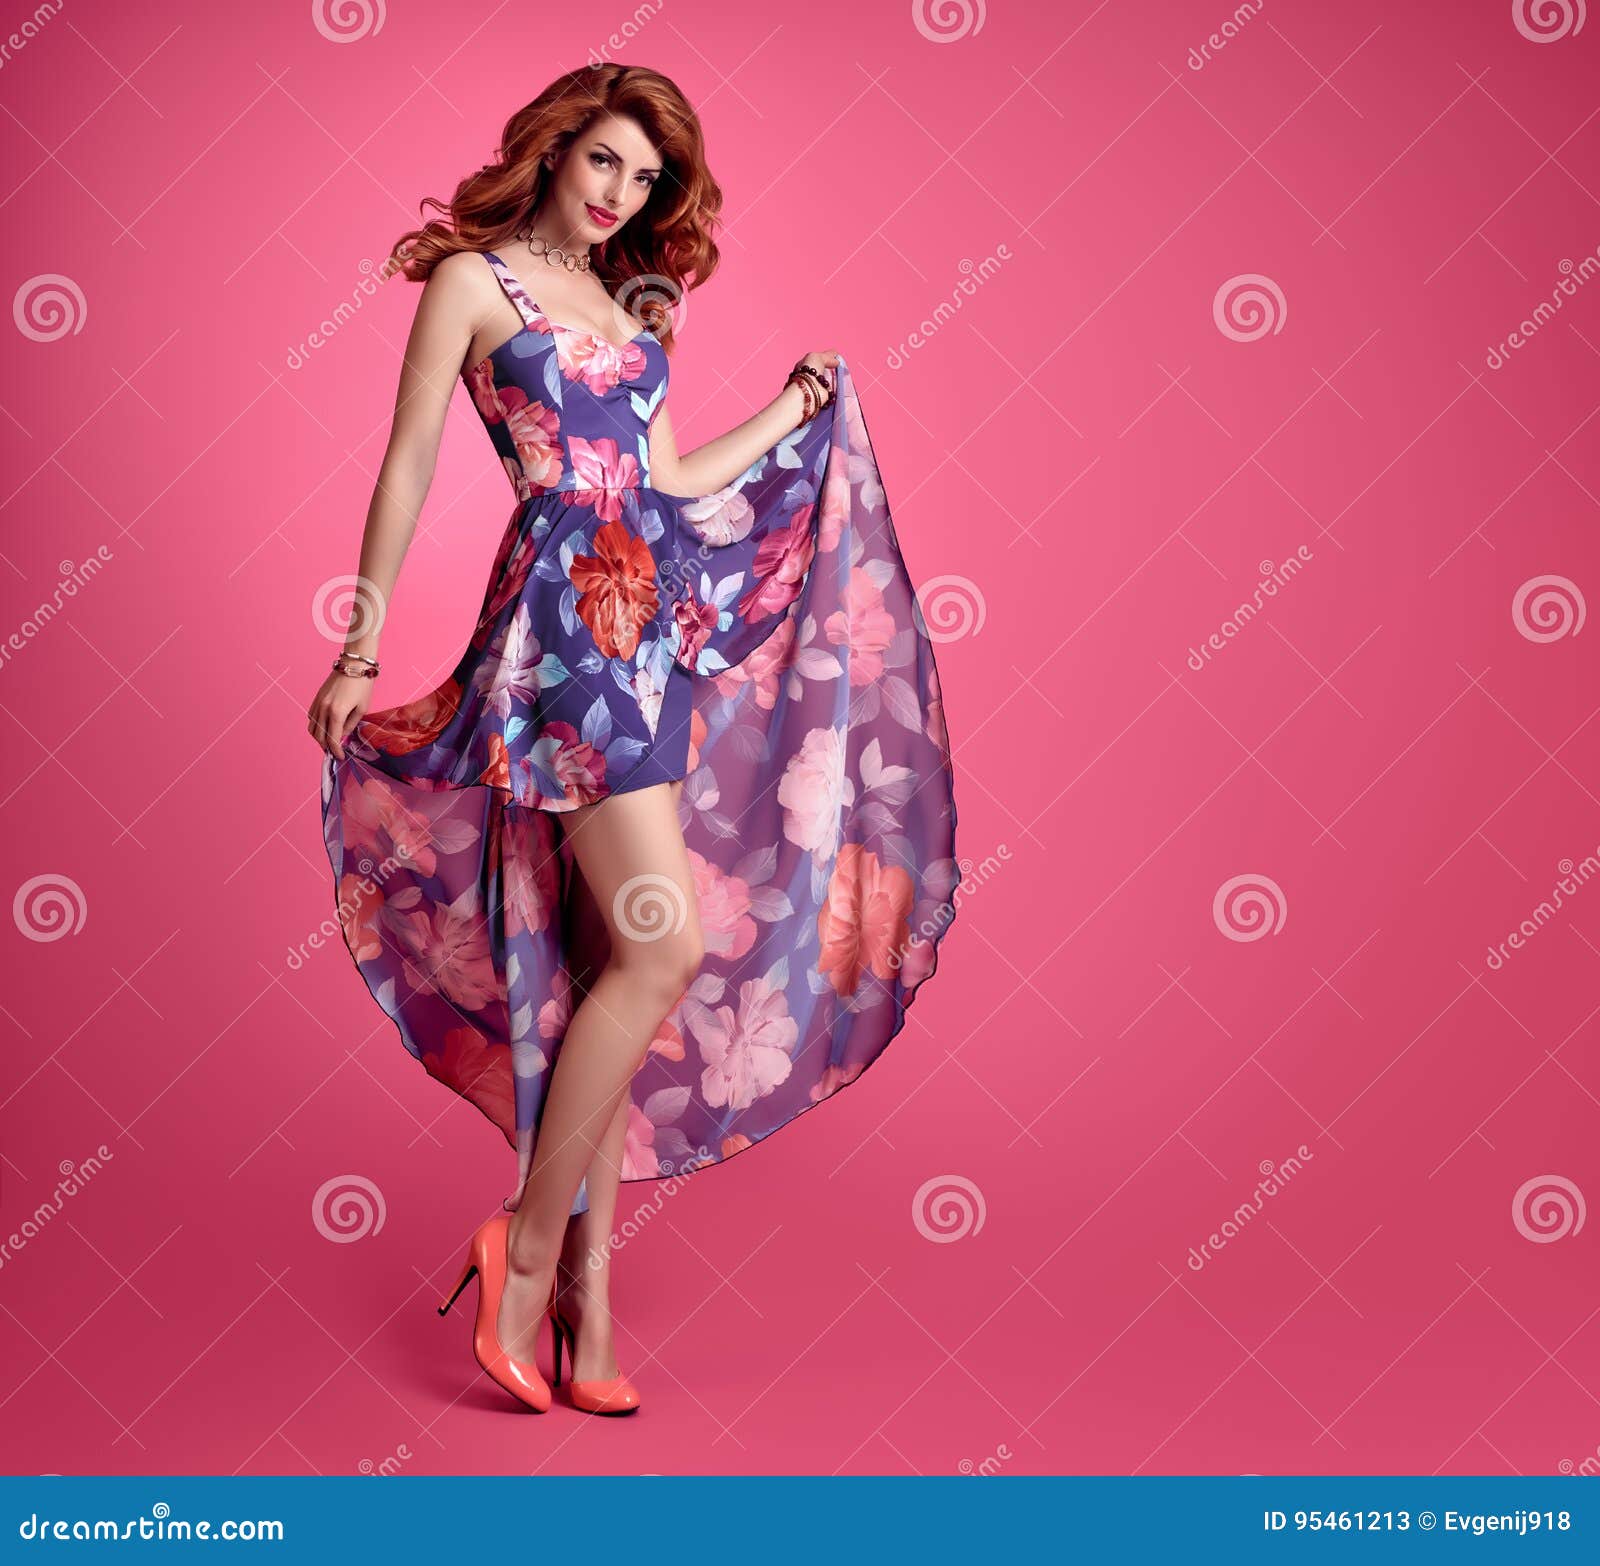 Fashion Sensual Redhead Girl Summer Floral Dress Stock Image Image Of Glamour Colorful 95461213